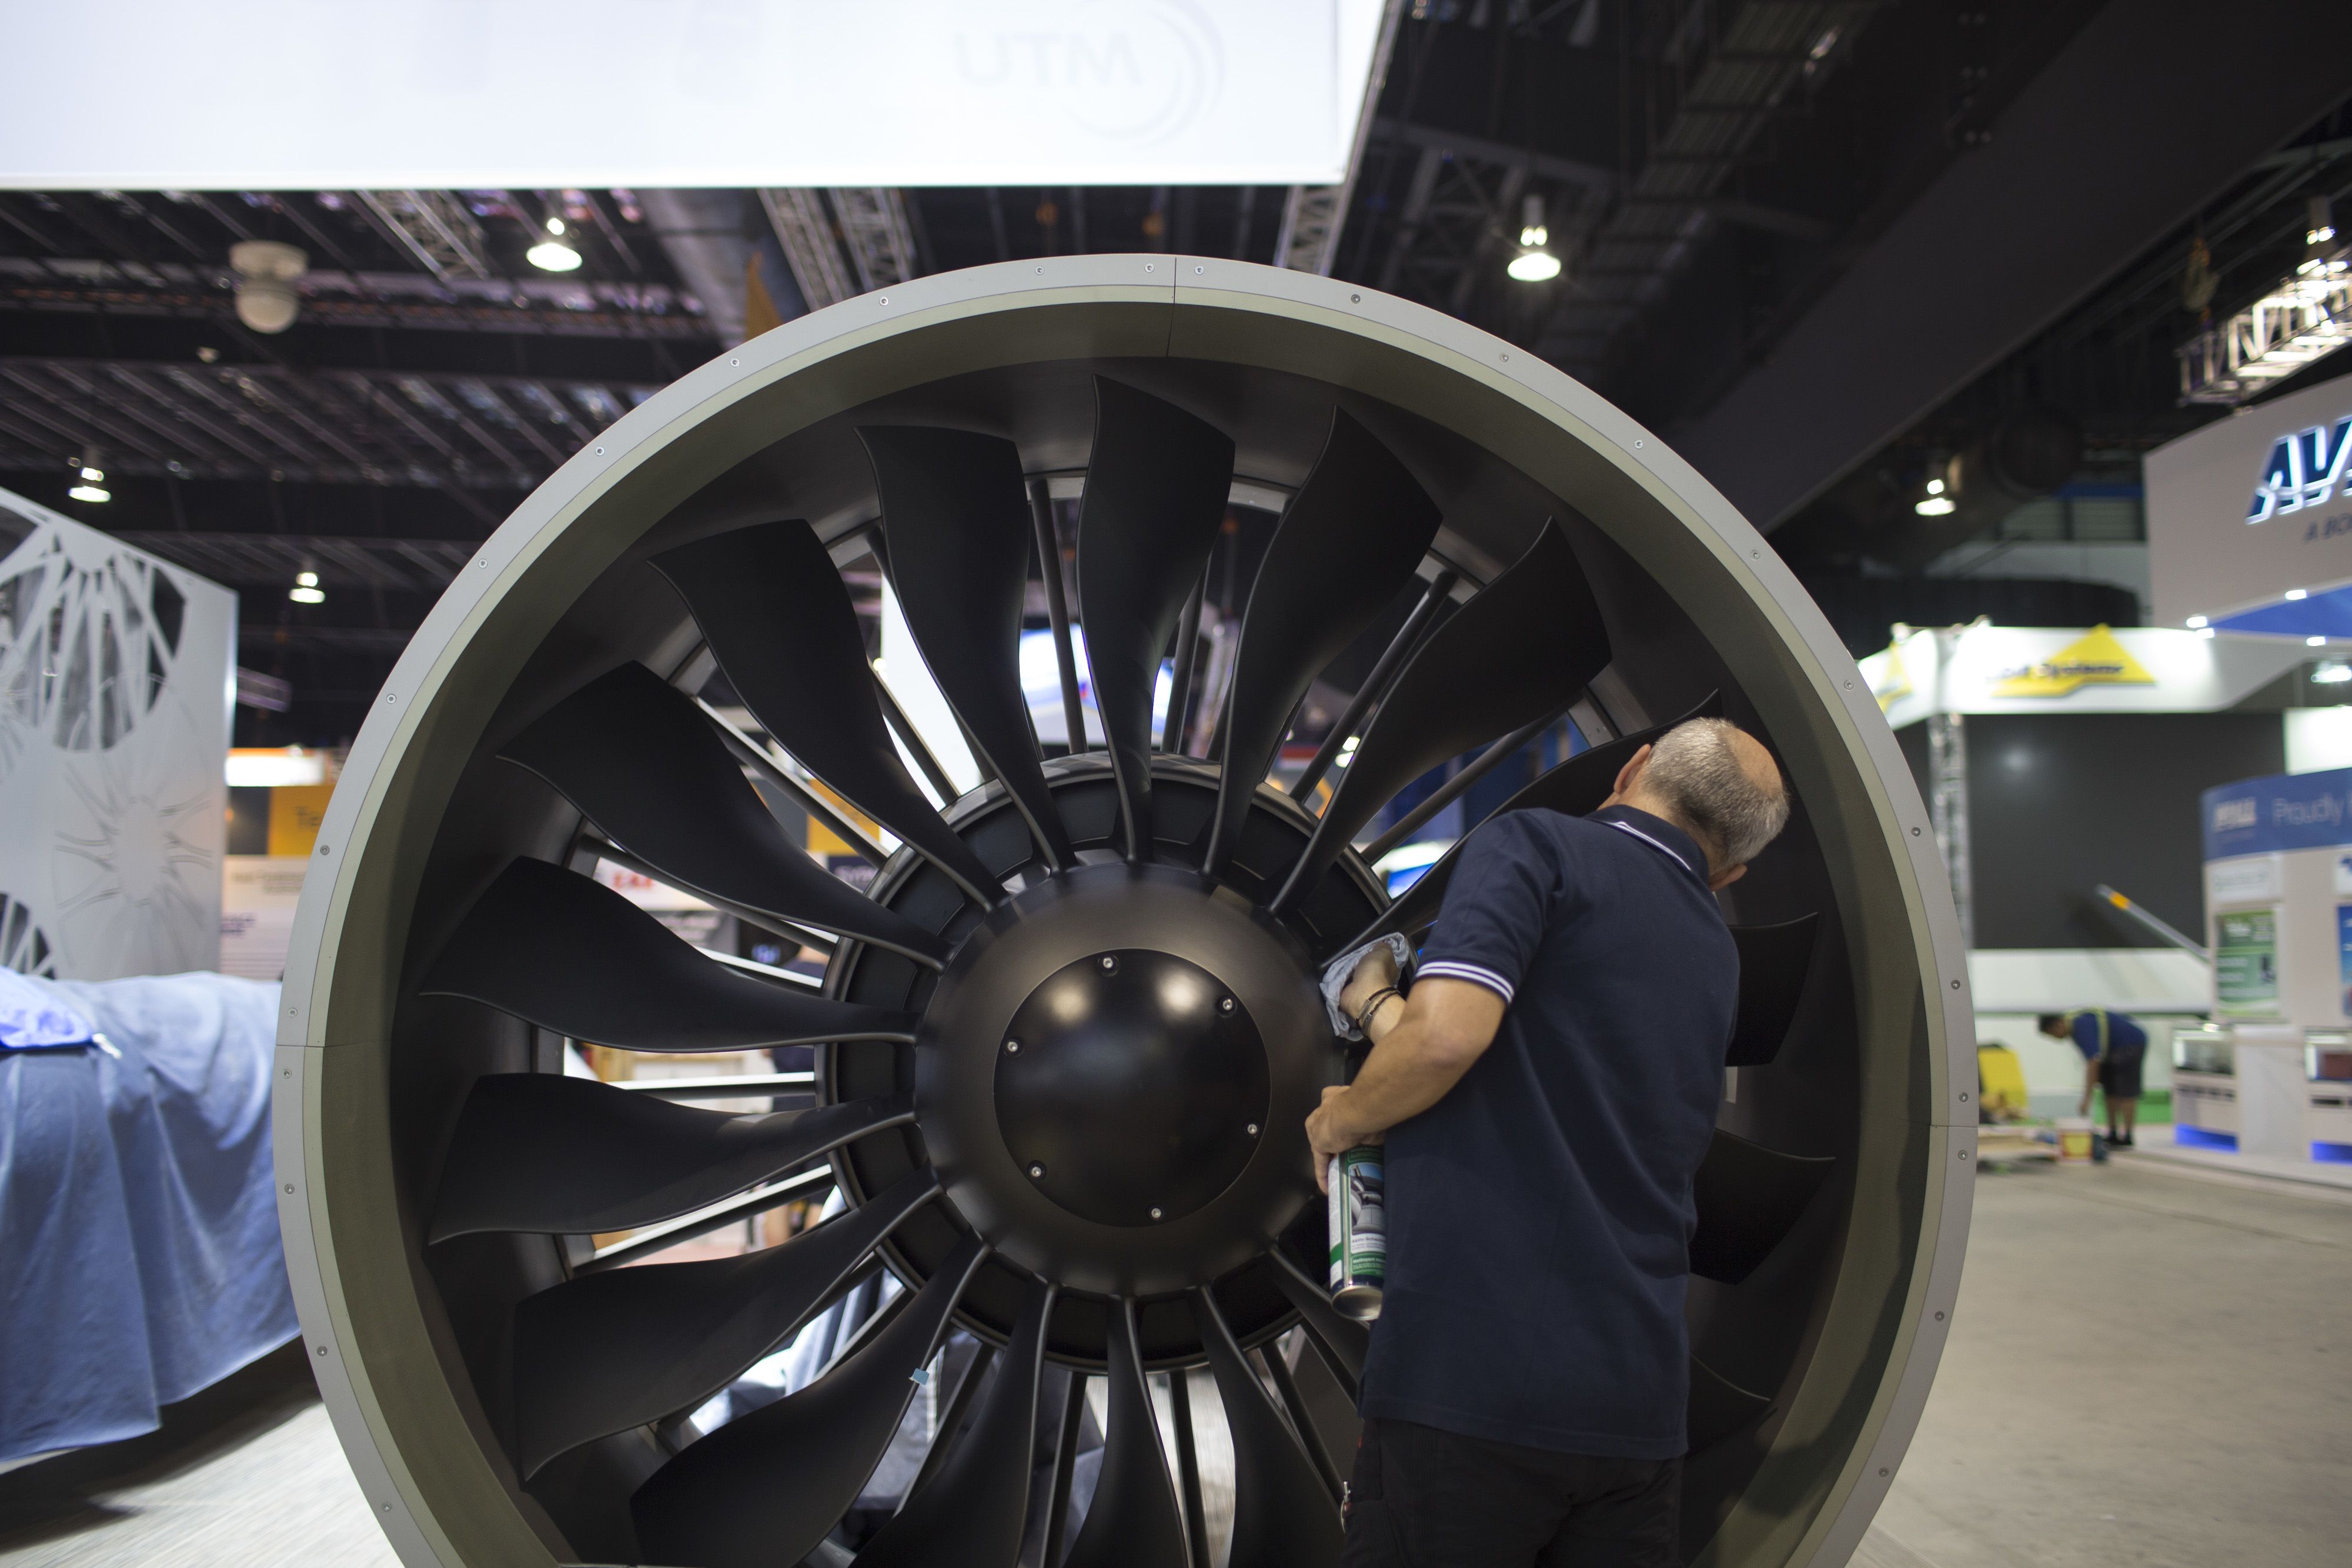 A man cleans a PW1000G geared turbofan engine developed by MTU Aero Engines AG and Pratt & Whitney, a unit of United Technologies Corp., at the Singapore Airshow held at the Changi Exhibition Centre in Singapore, on Monday, Feb. 10, 2014.